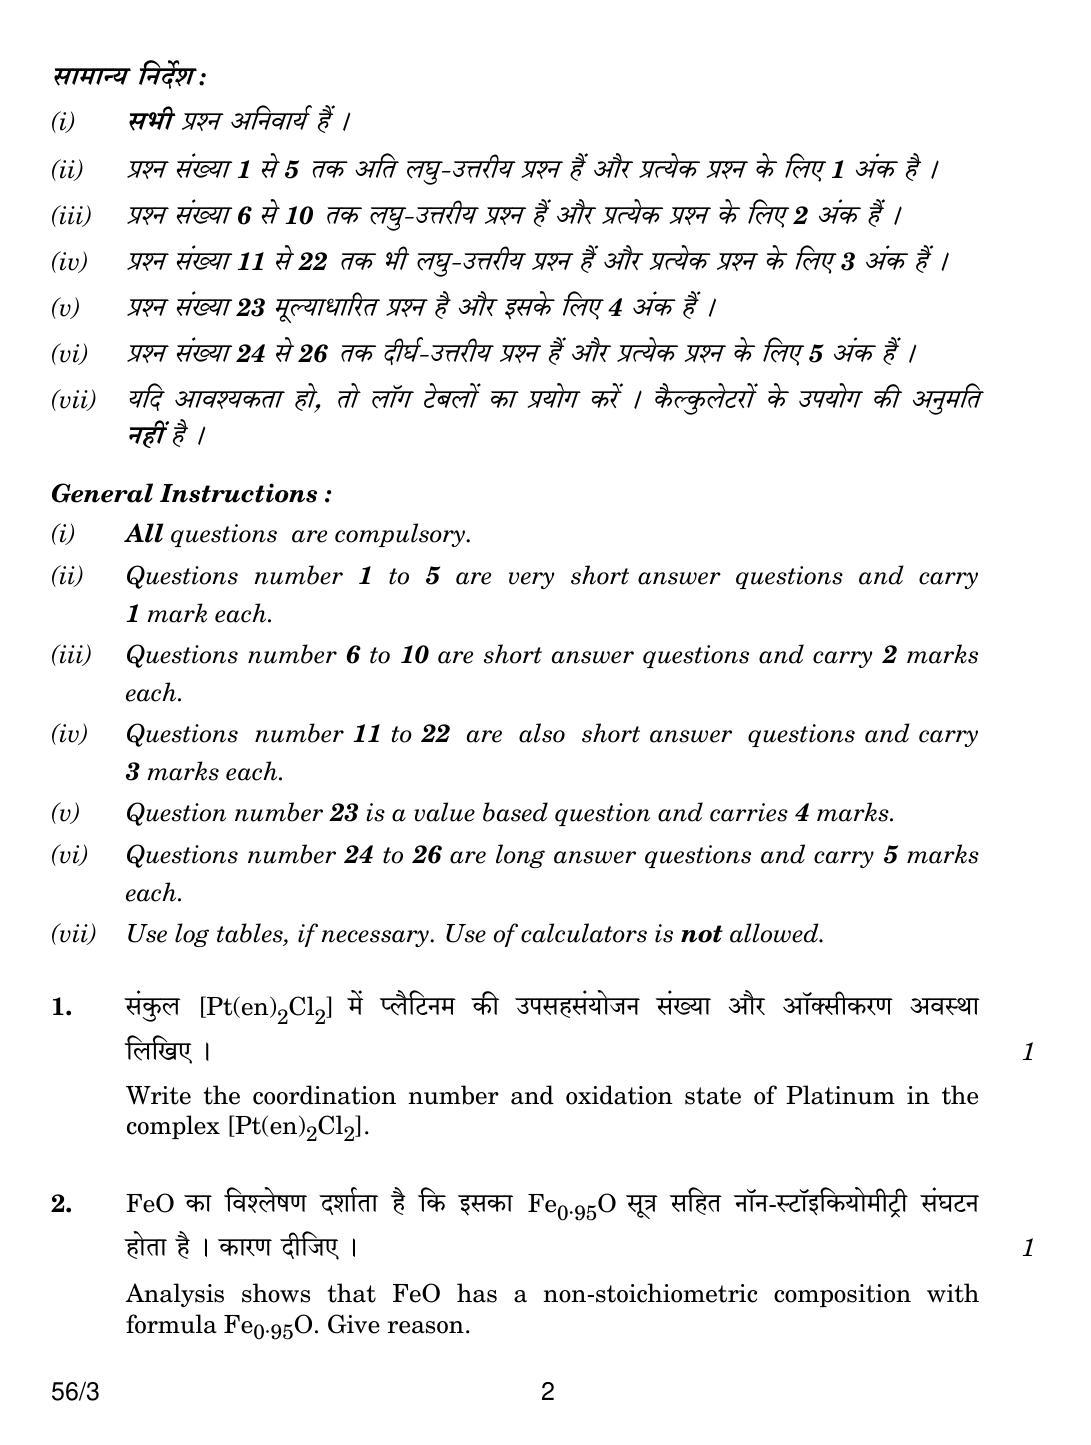 CBSE Class 12 56-3 CHEMISTRY 2018 Question Paper - Page 2